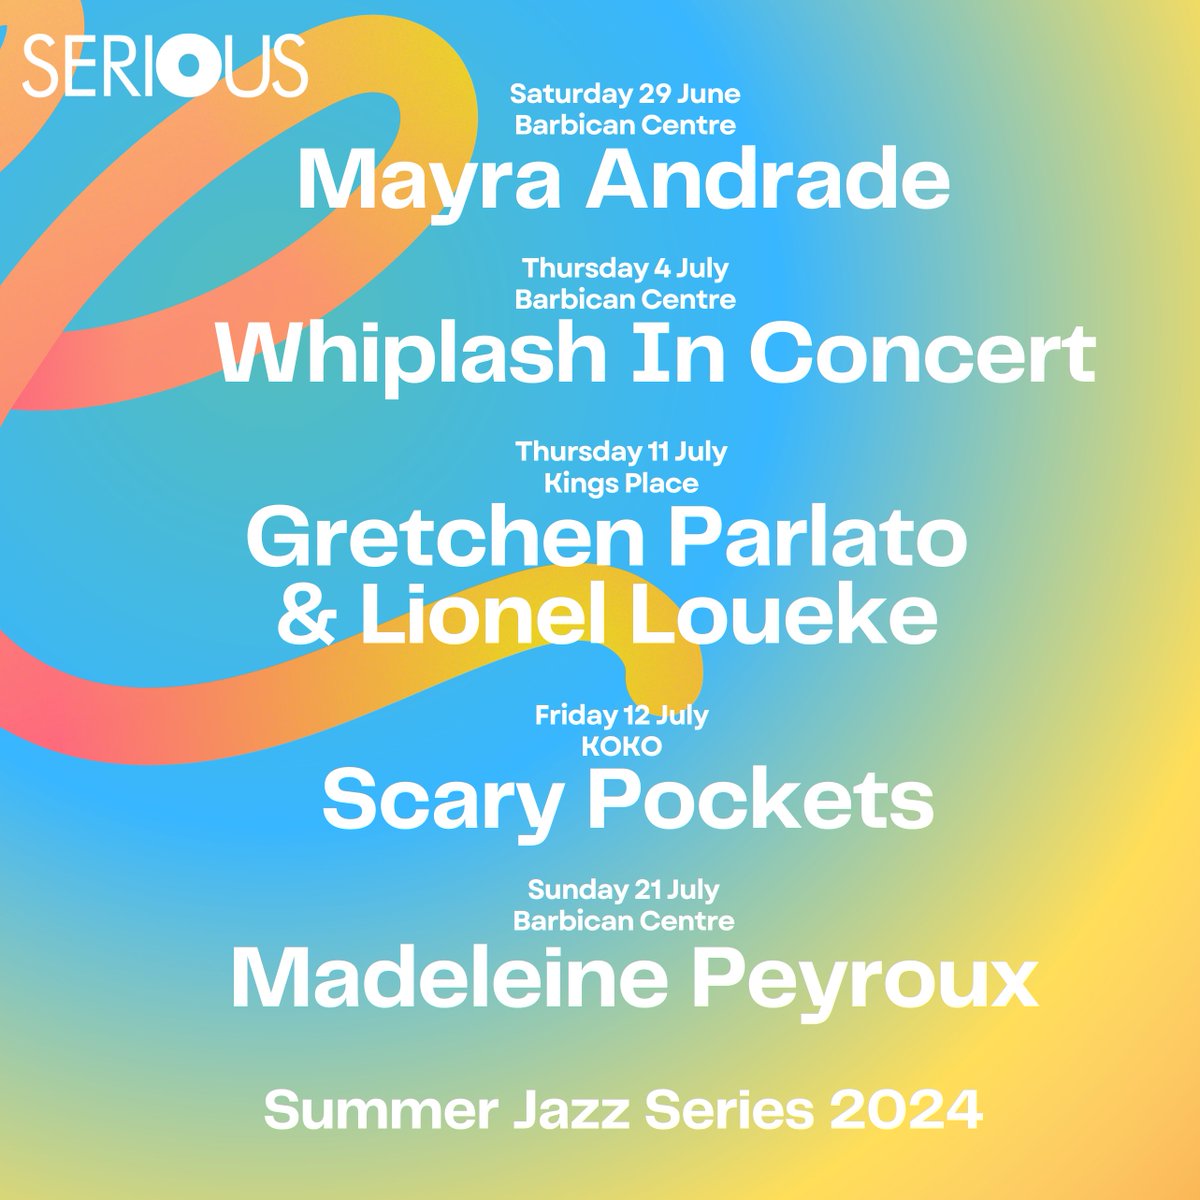 This summer, global jazz stars come to London as we takeover the Barbican, KOKO and Kings Place for the Summer Jazz Series🌞 @_MayraAndrade_ Whiplash In Concert @gretchenparlato & @lionelloueke @scarypockets @mpeyrouxmusic ⏰On sale Fri 5 April, 10am serious.org.uk/summerjazzseri…